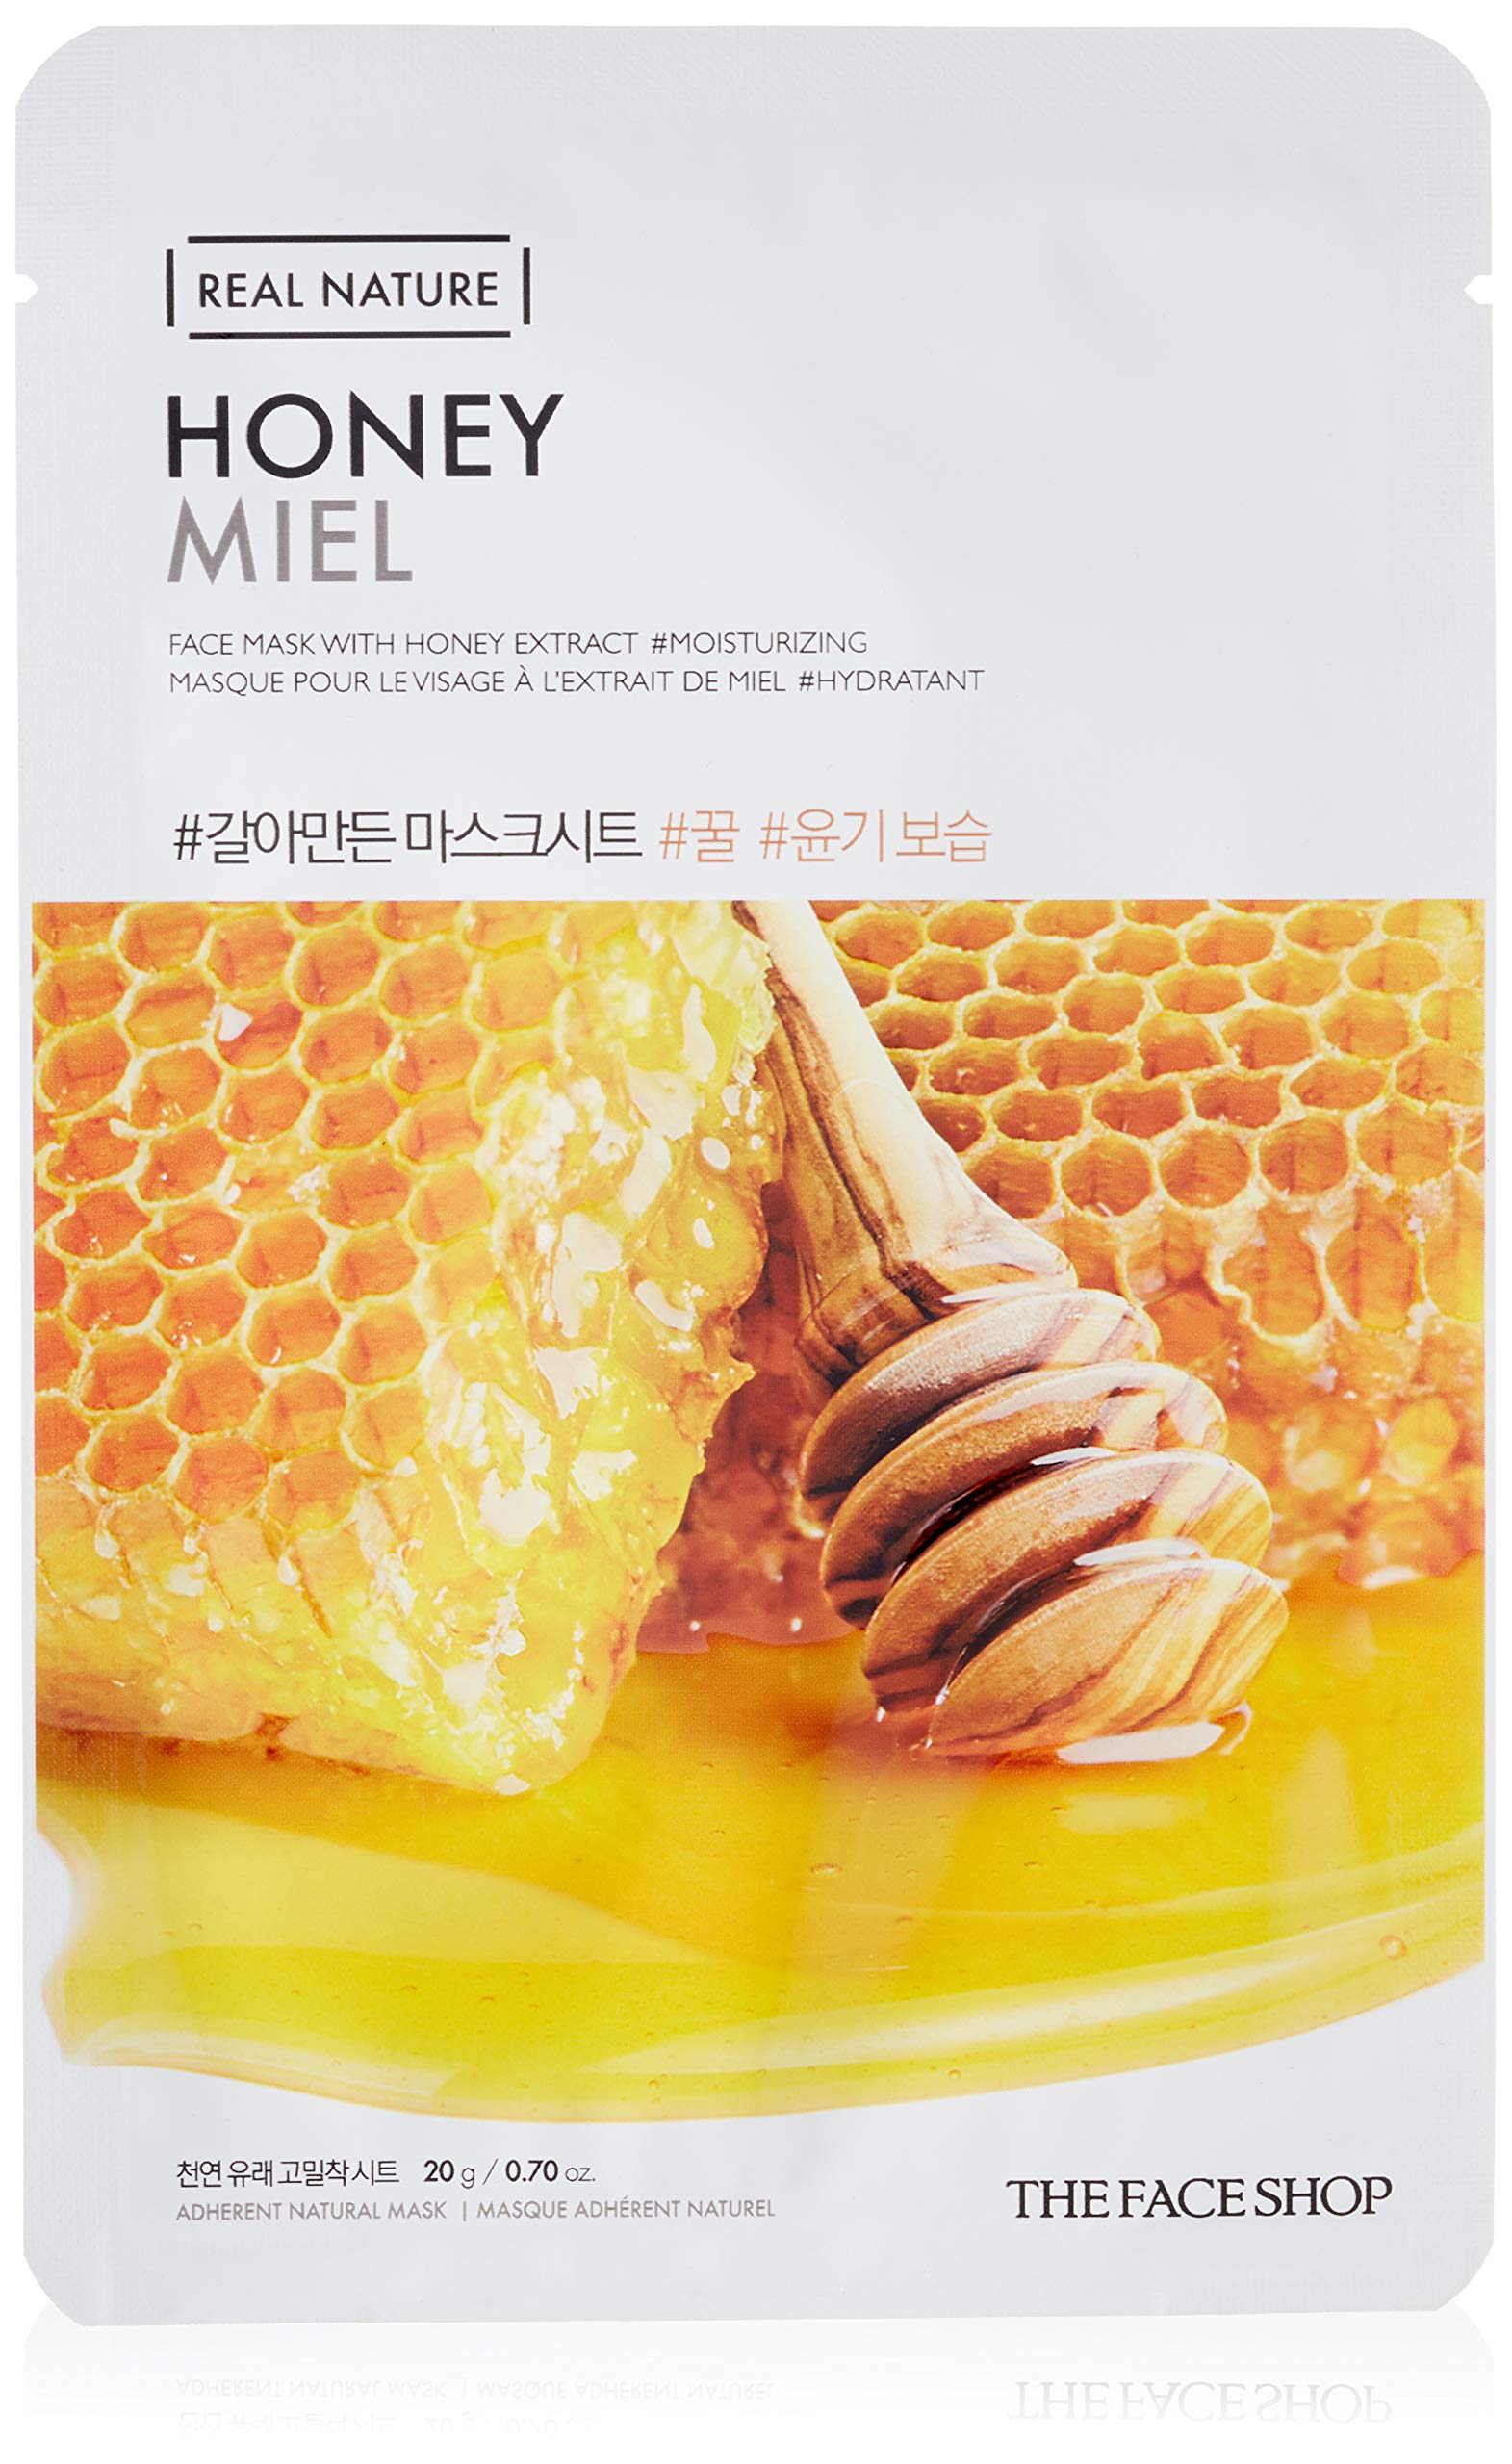 The Face Shop Real Nature Face Mask | Contains Honey That Provides Extra Glow & Helps Regain Skin’s Radiance & Moisture | K Beauty Facial Skincare for Oily & Dry Skin | Honey, K-Beauty